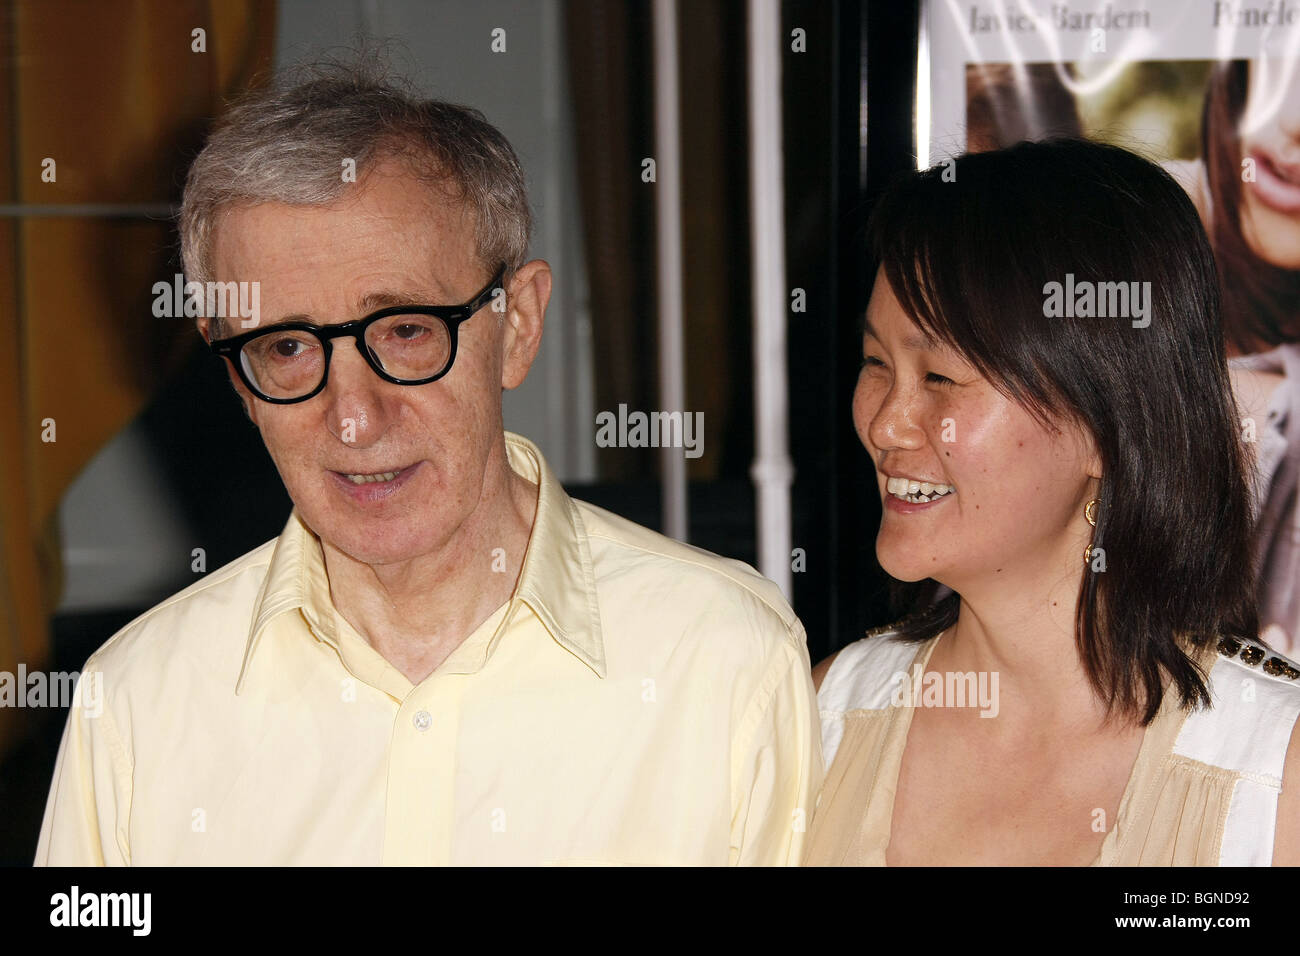 WOODY ALLEN SOON YI VICKY CRISTINA BARCELONA FILM PREMIERE WESTWOOD LOS ANGELES USA 04 August 2008 Stock Photo